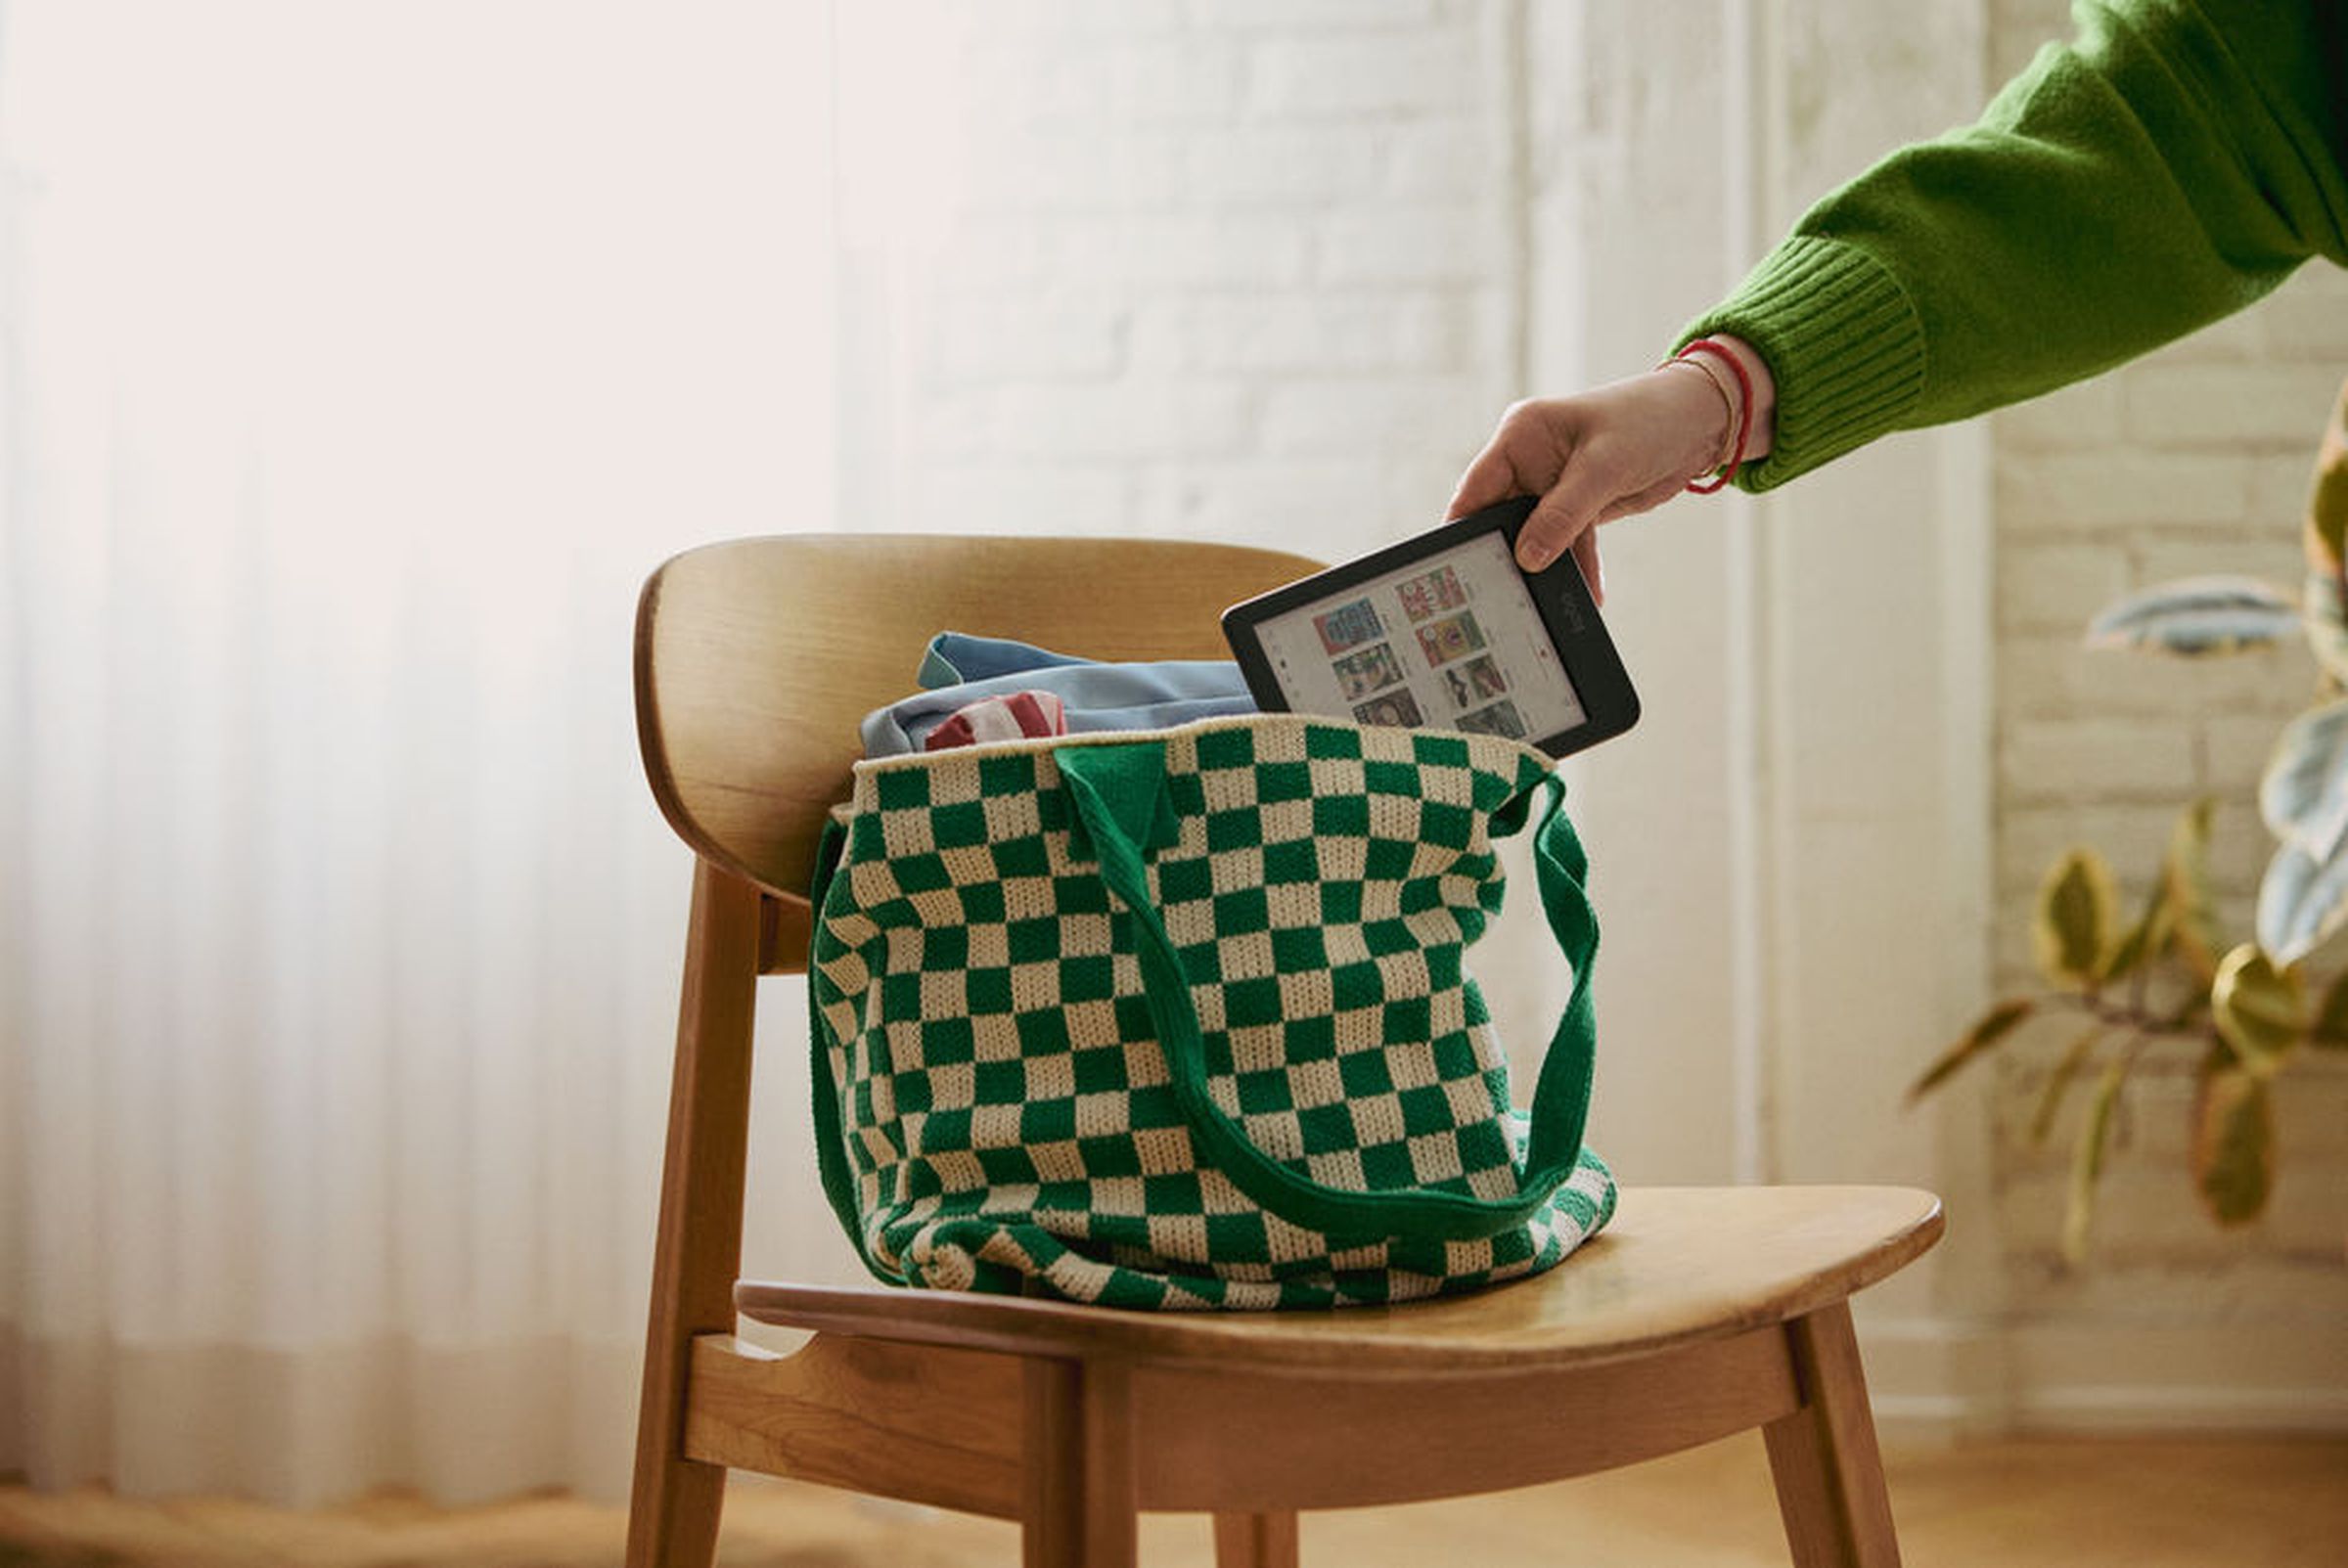 An image of an outstretched hand stuffing a Kobo Libra Colour into a green-and-white purse.